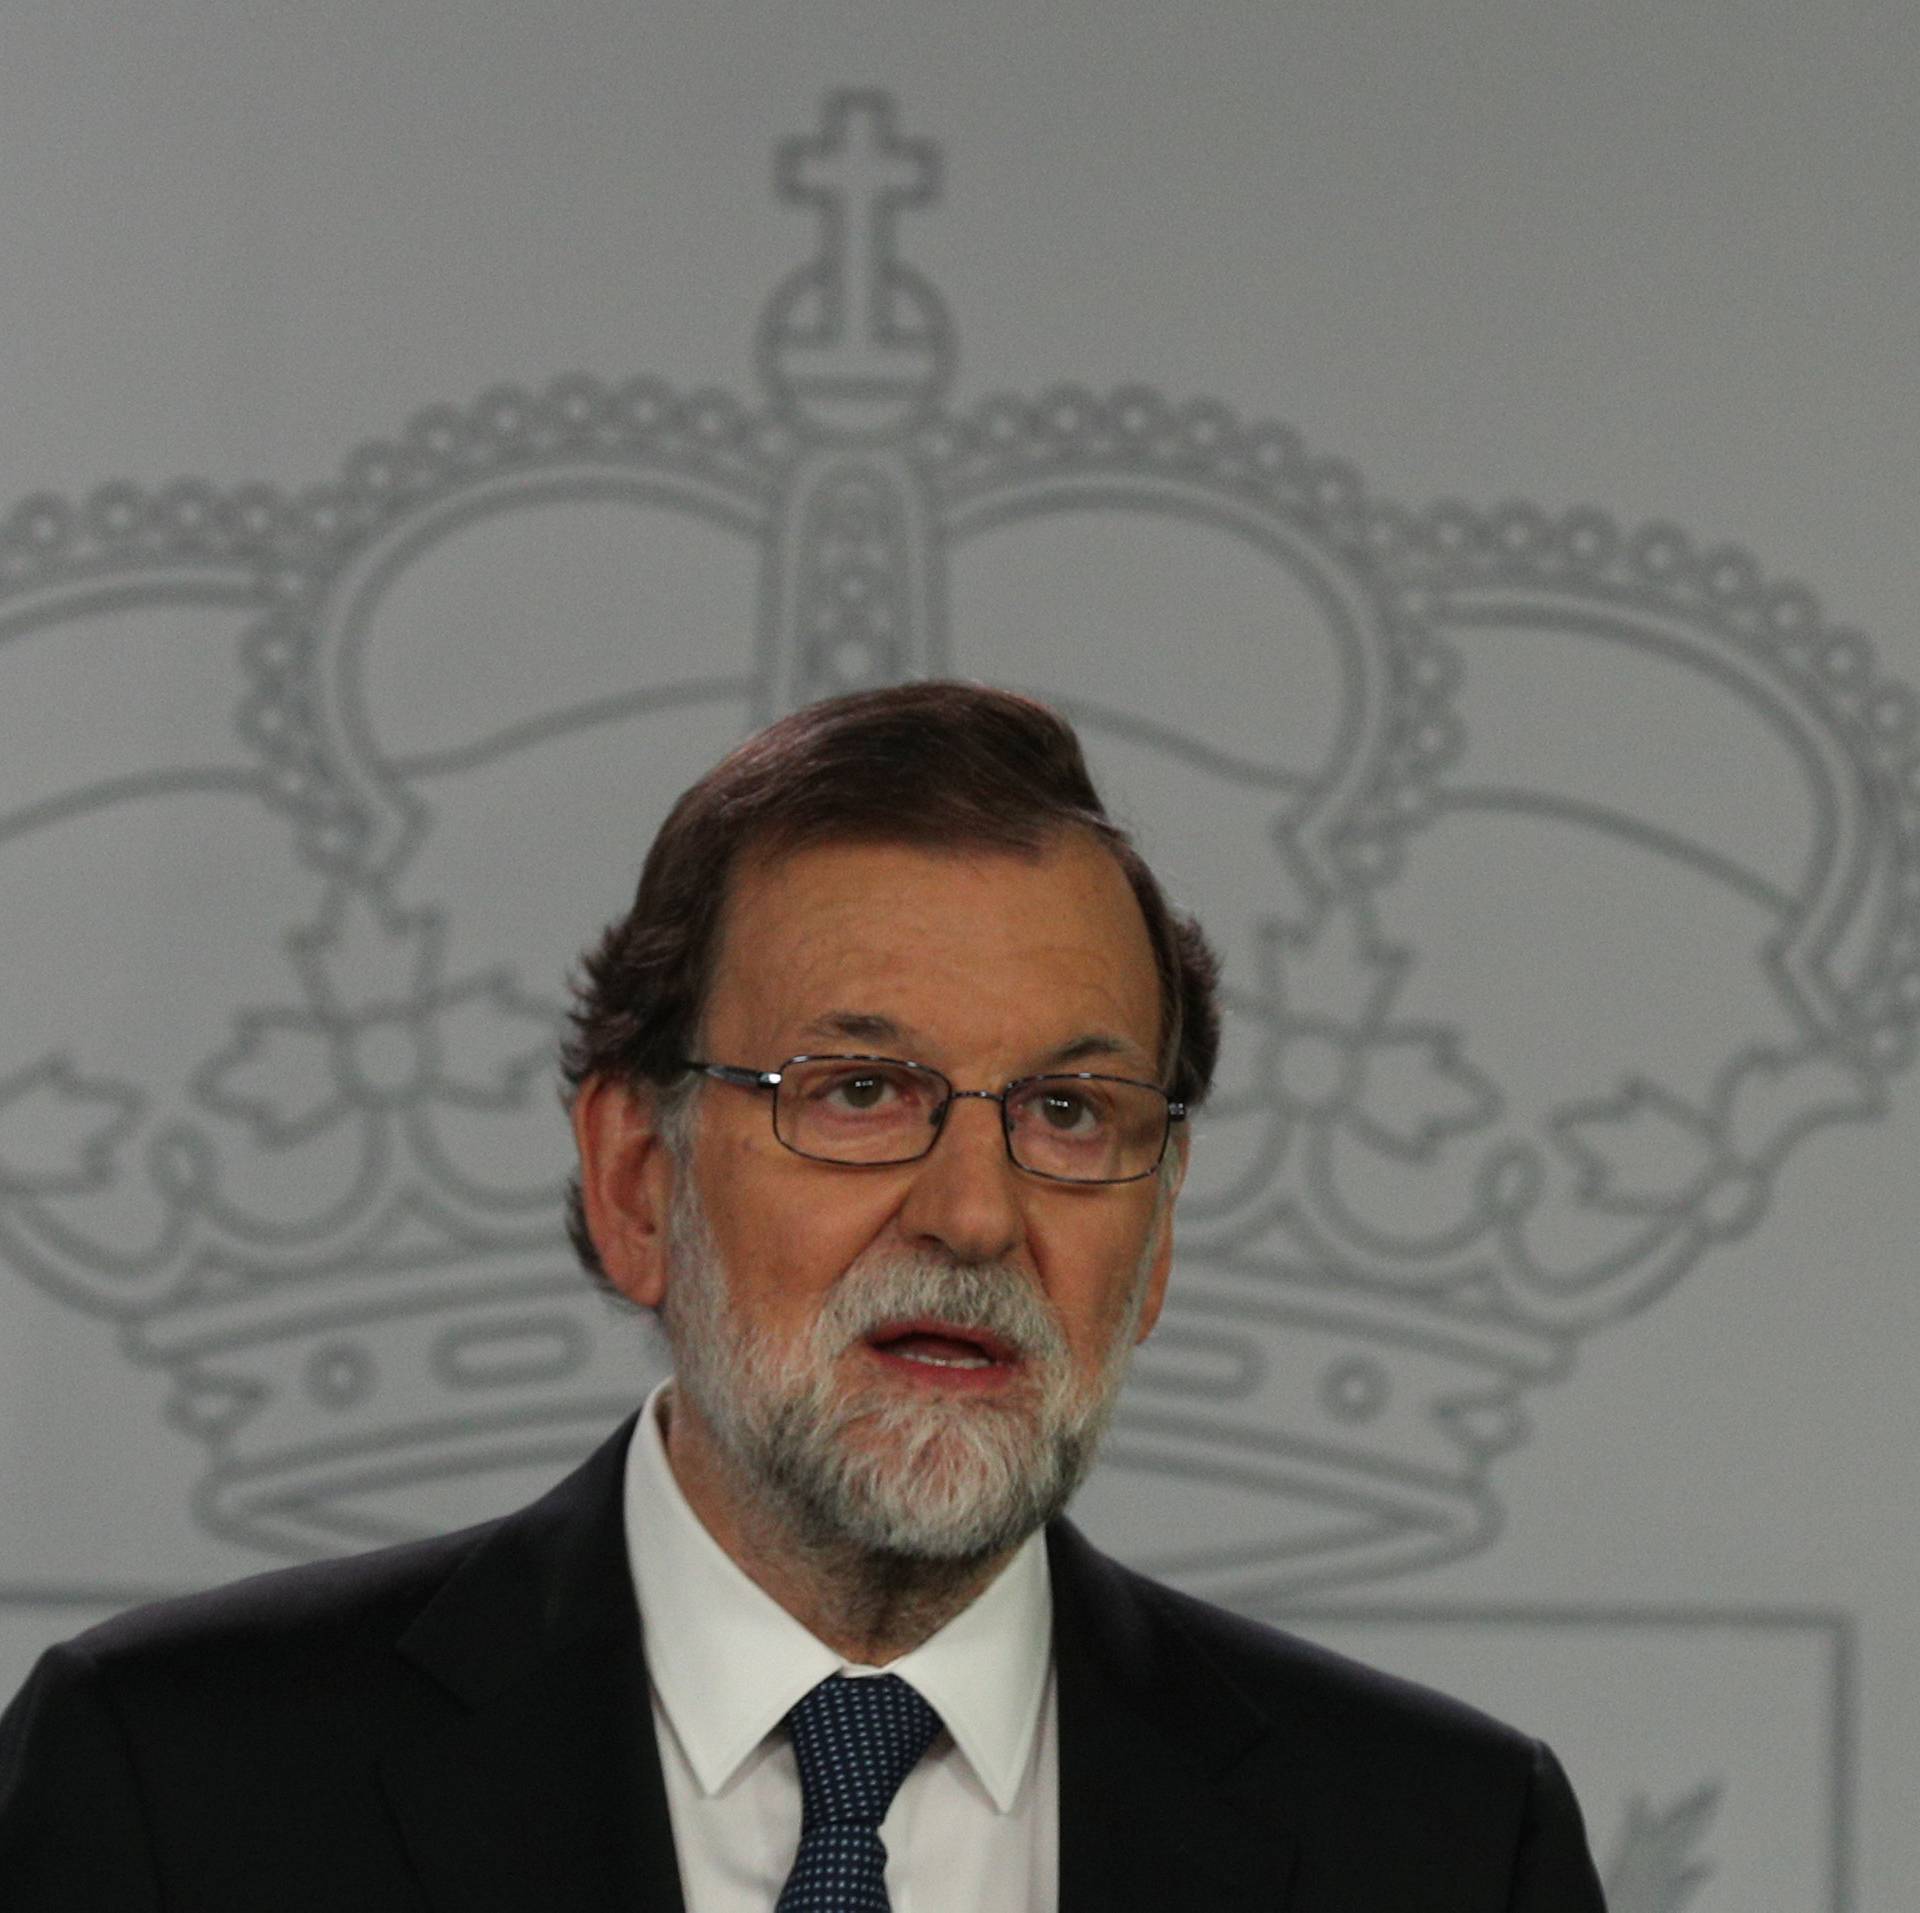 Spain's PM Rajoy delivers an statement at the Moncloa Palace in Madrid